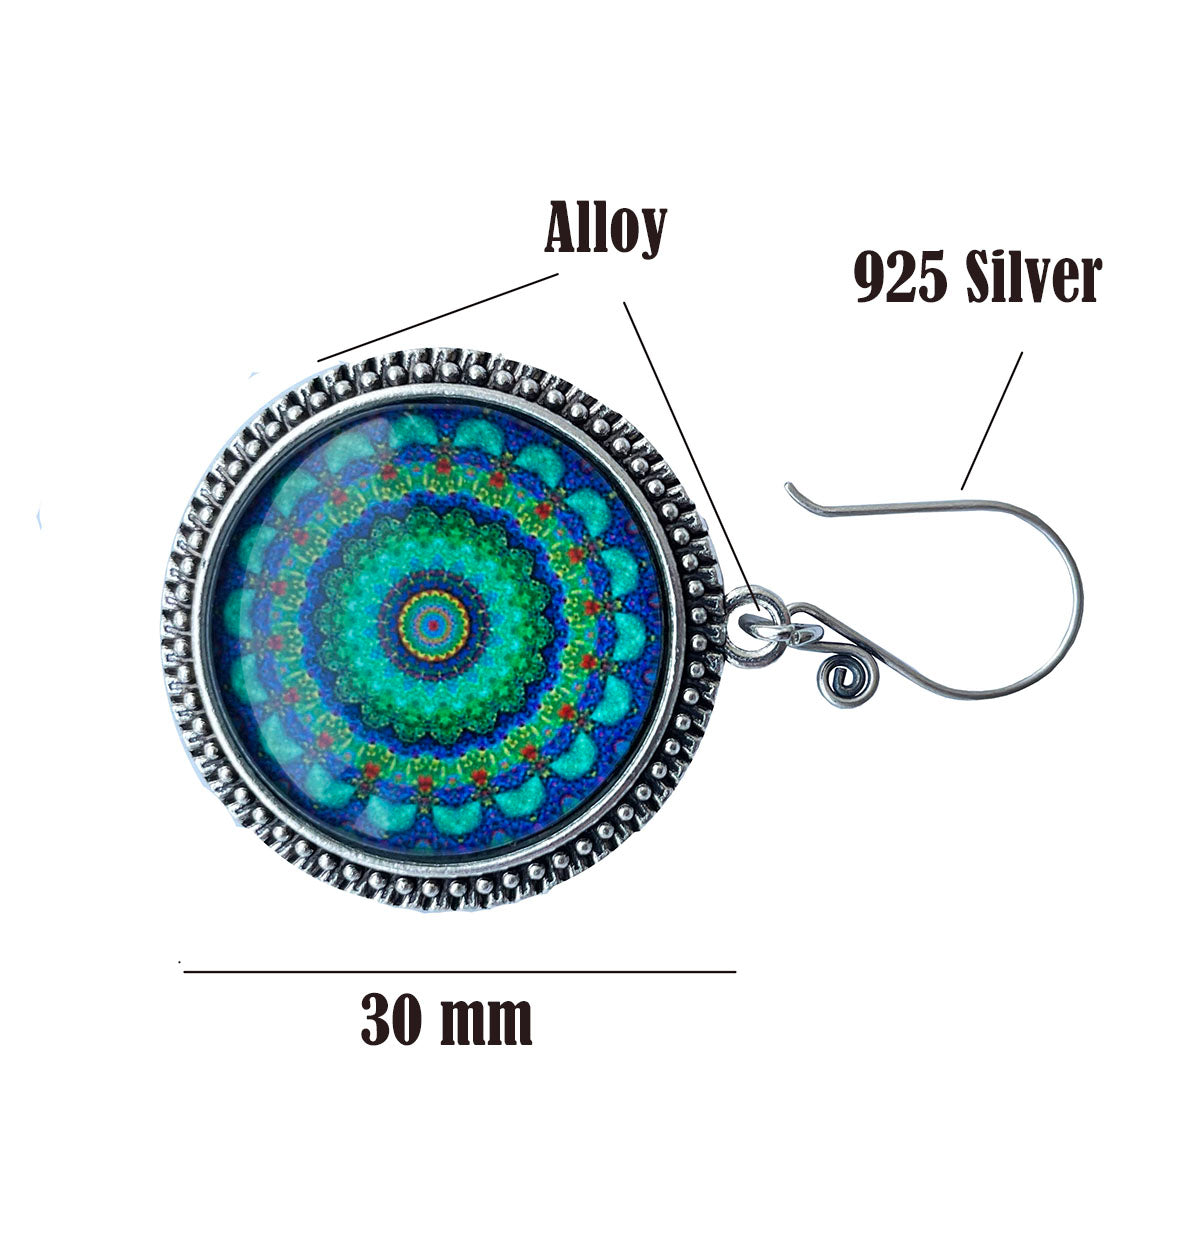 lovielf 925 Silver Portuguese Knitting Pin for Knitters with Teal Bohemian Mandala Design- Magnetic | 2 pcs